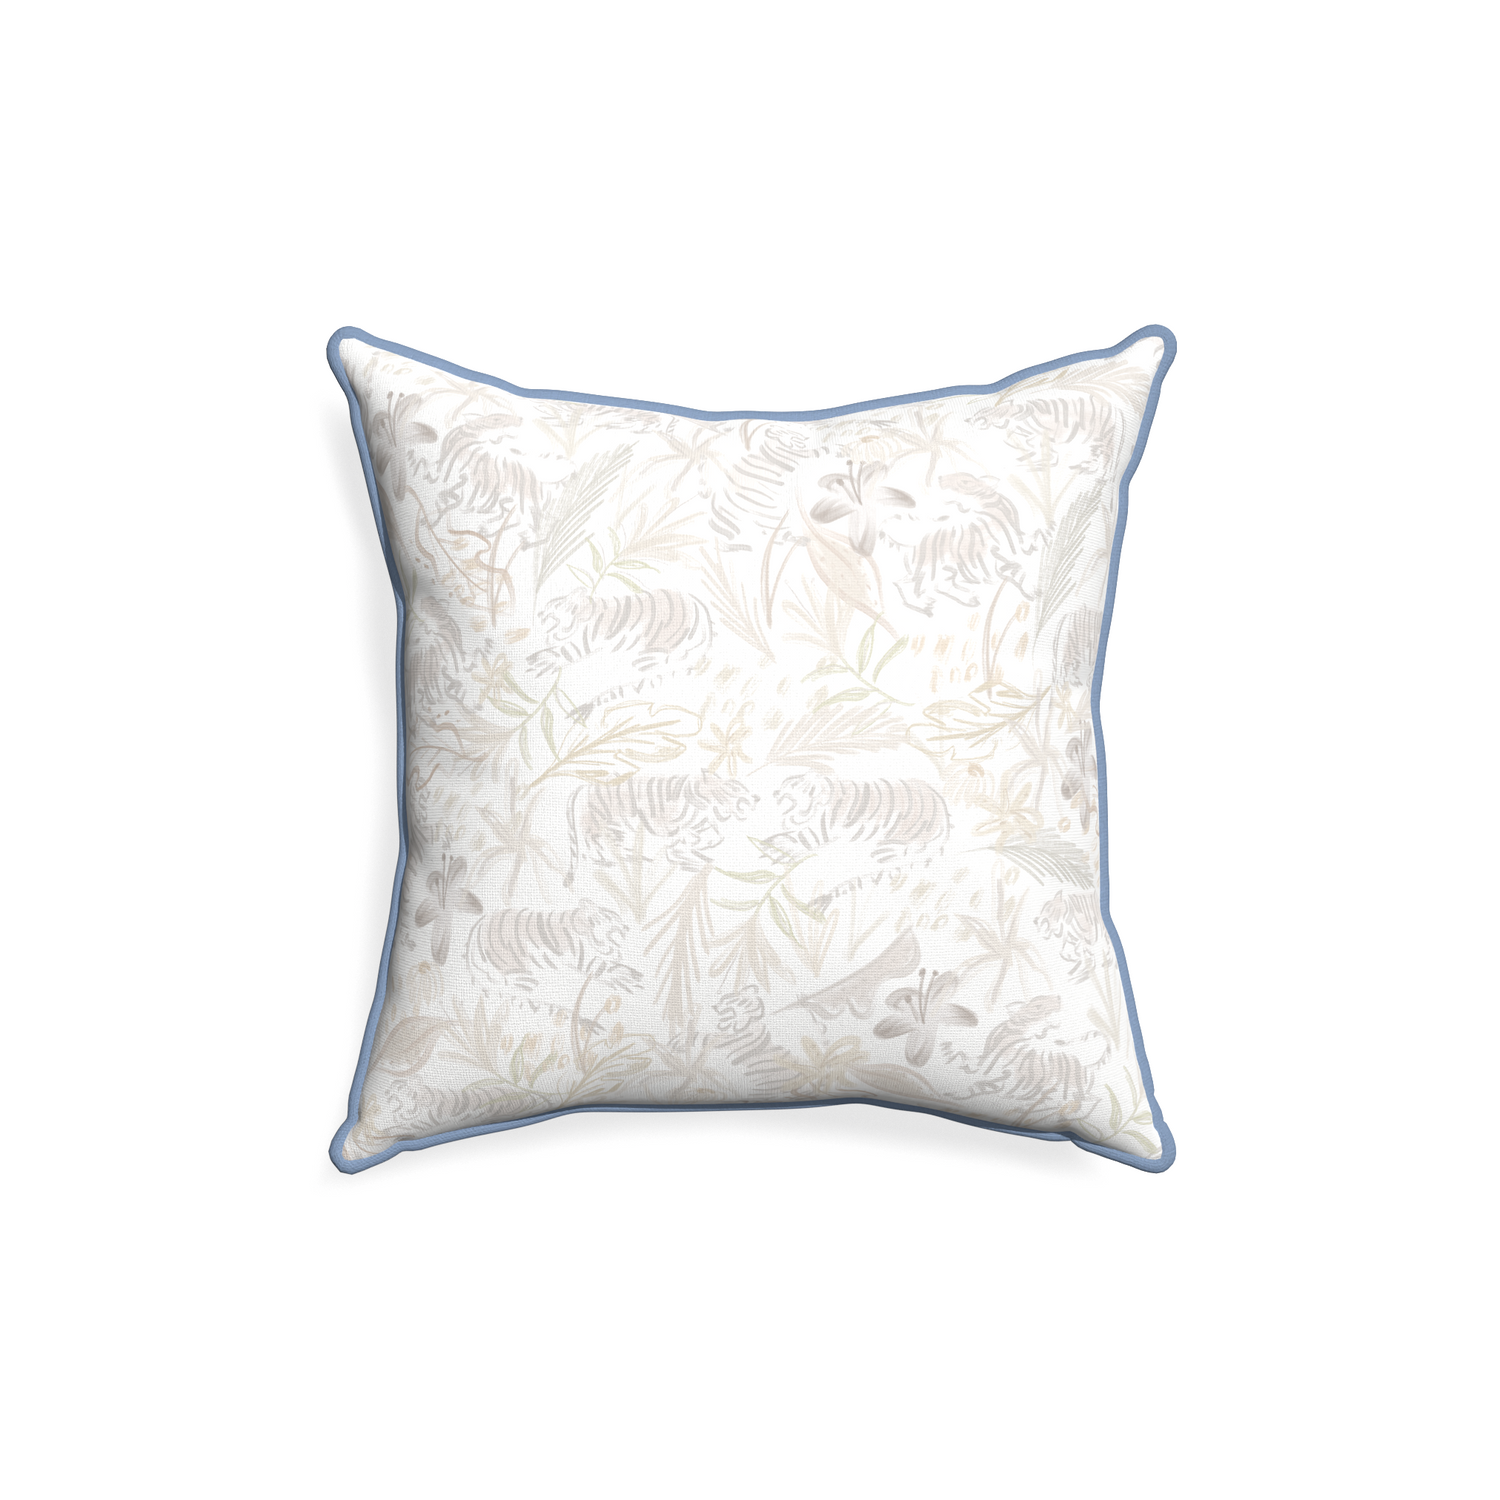 18-square frida sand custom beige chinoiserie tigerpillow with sky piping on white background